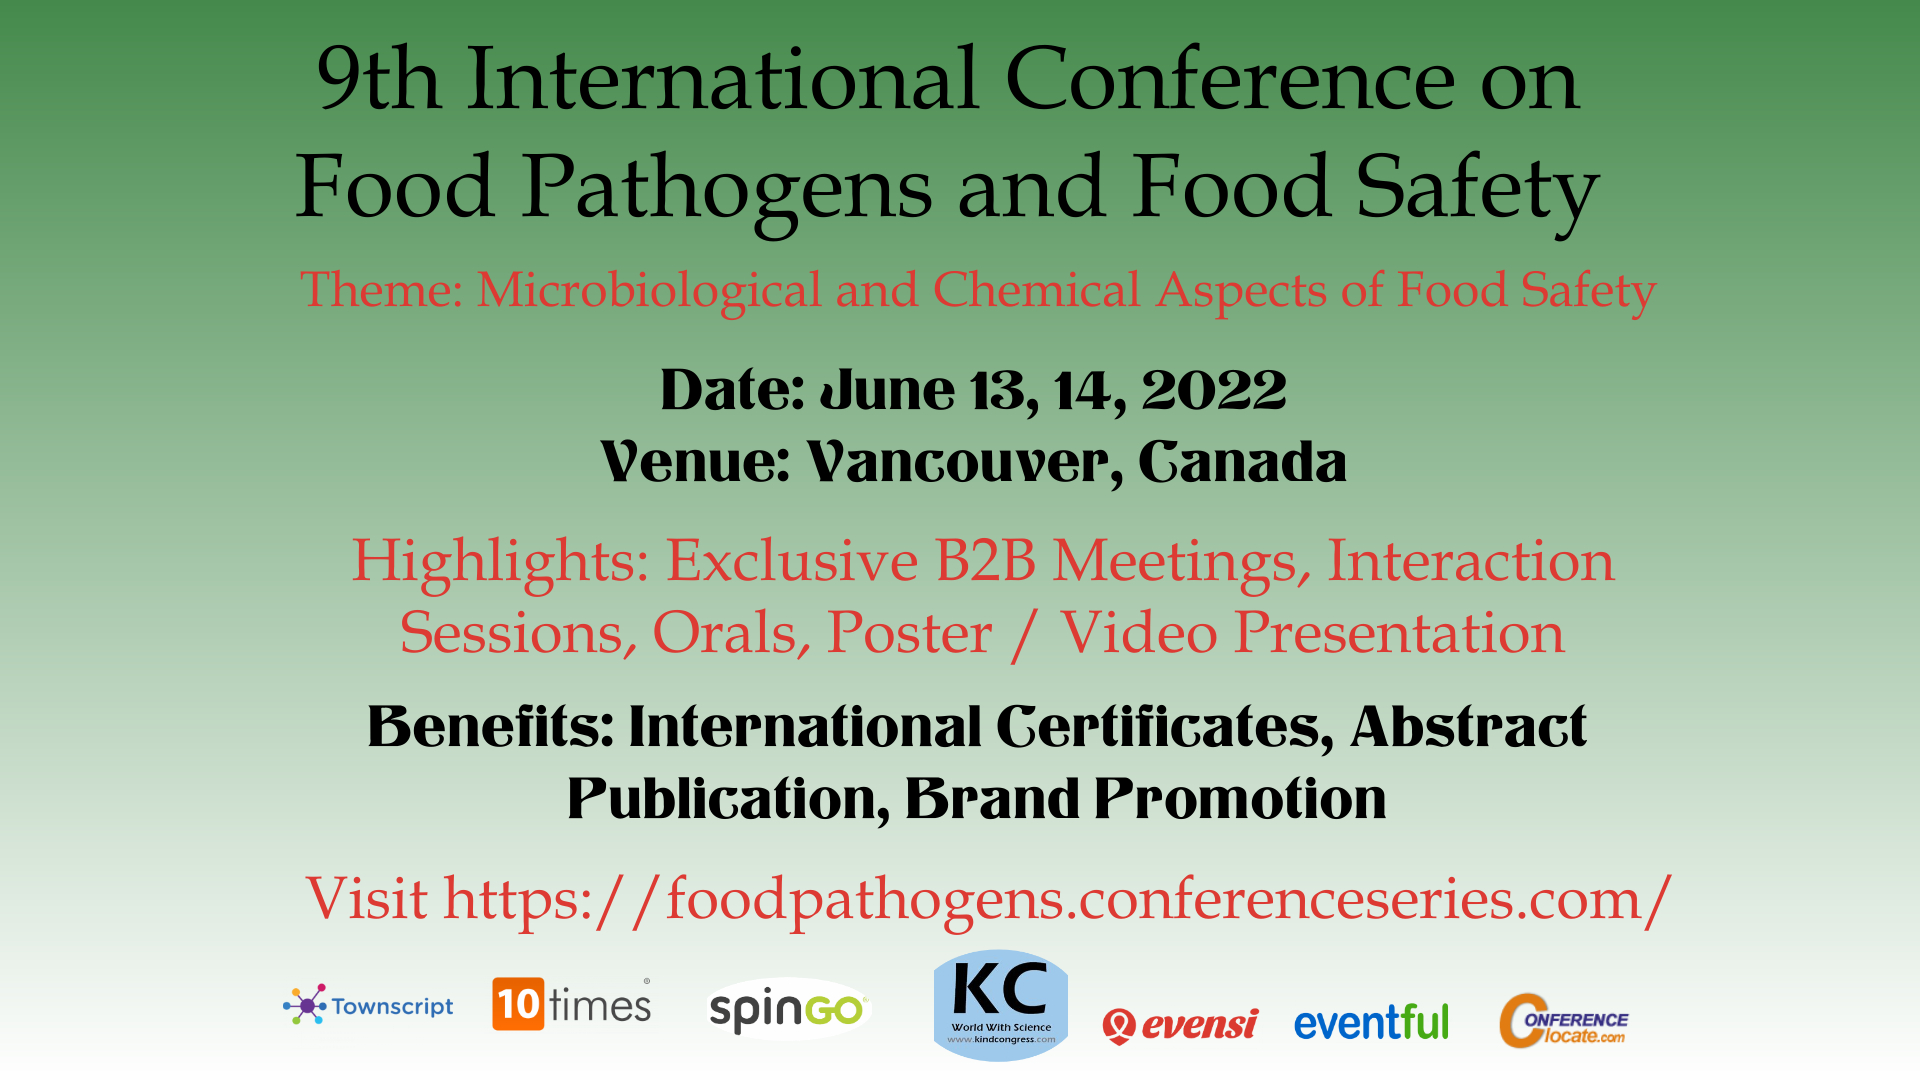 9th International Conference on Food pathogens and Food Safety, Online Event